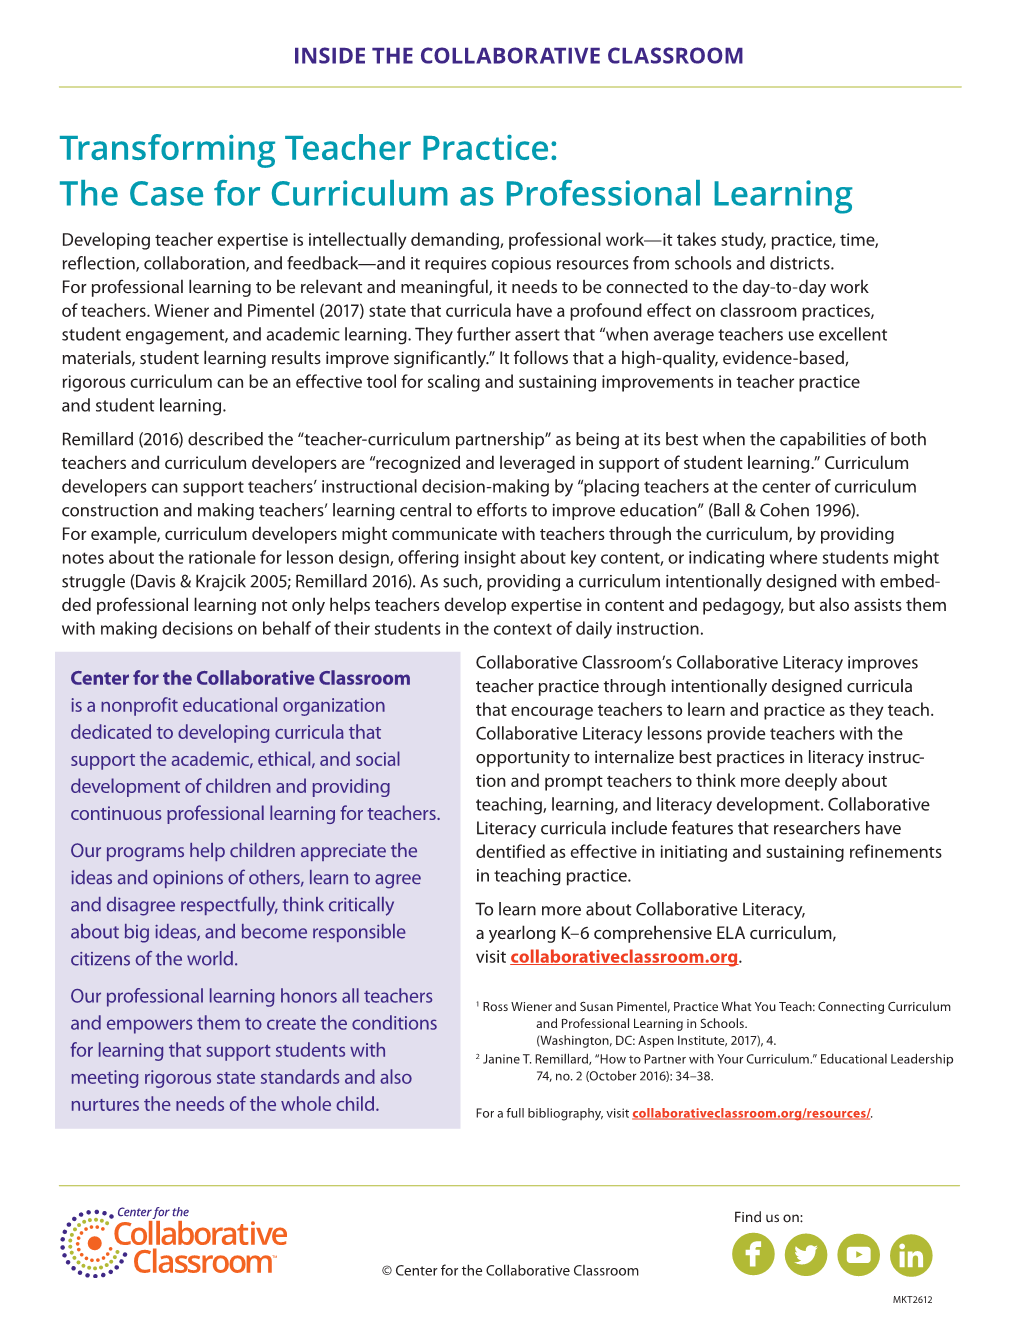 Transforming Teacher Practice: the Case for Curriculum As